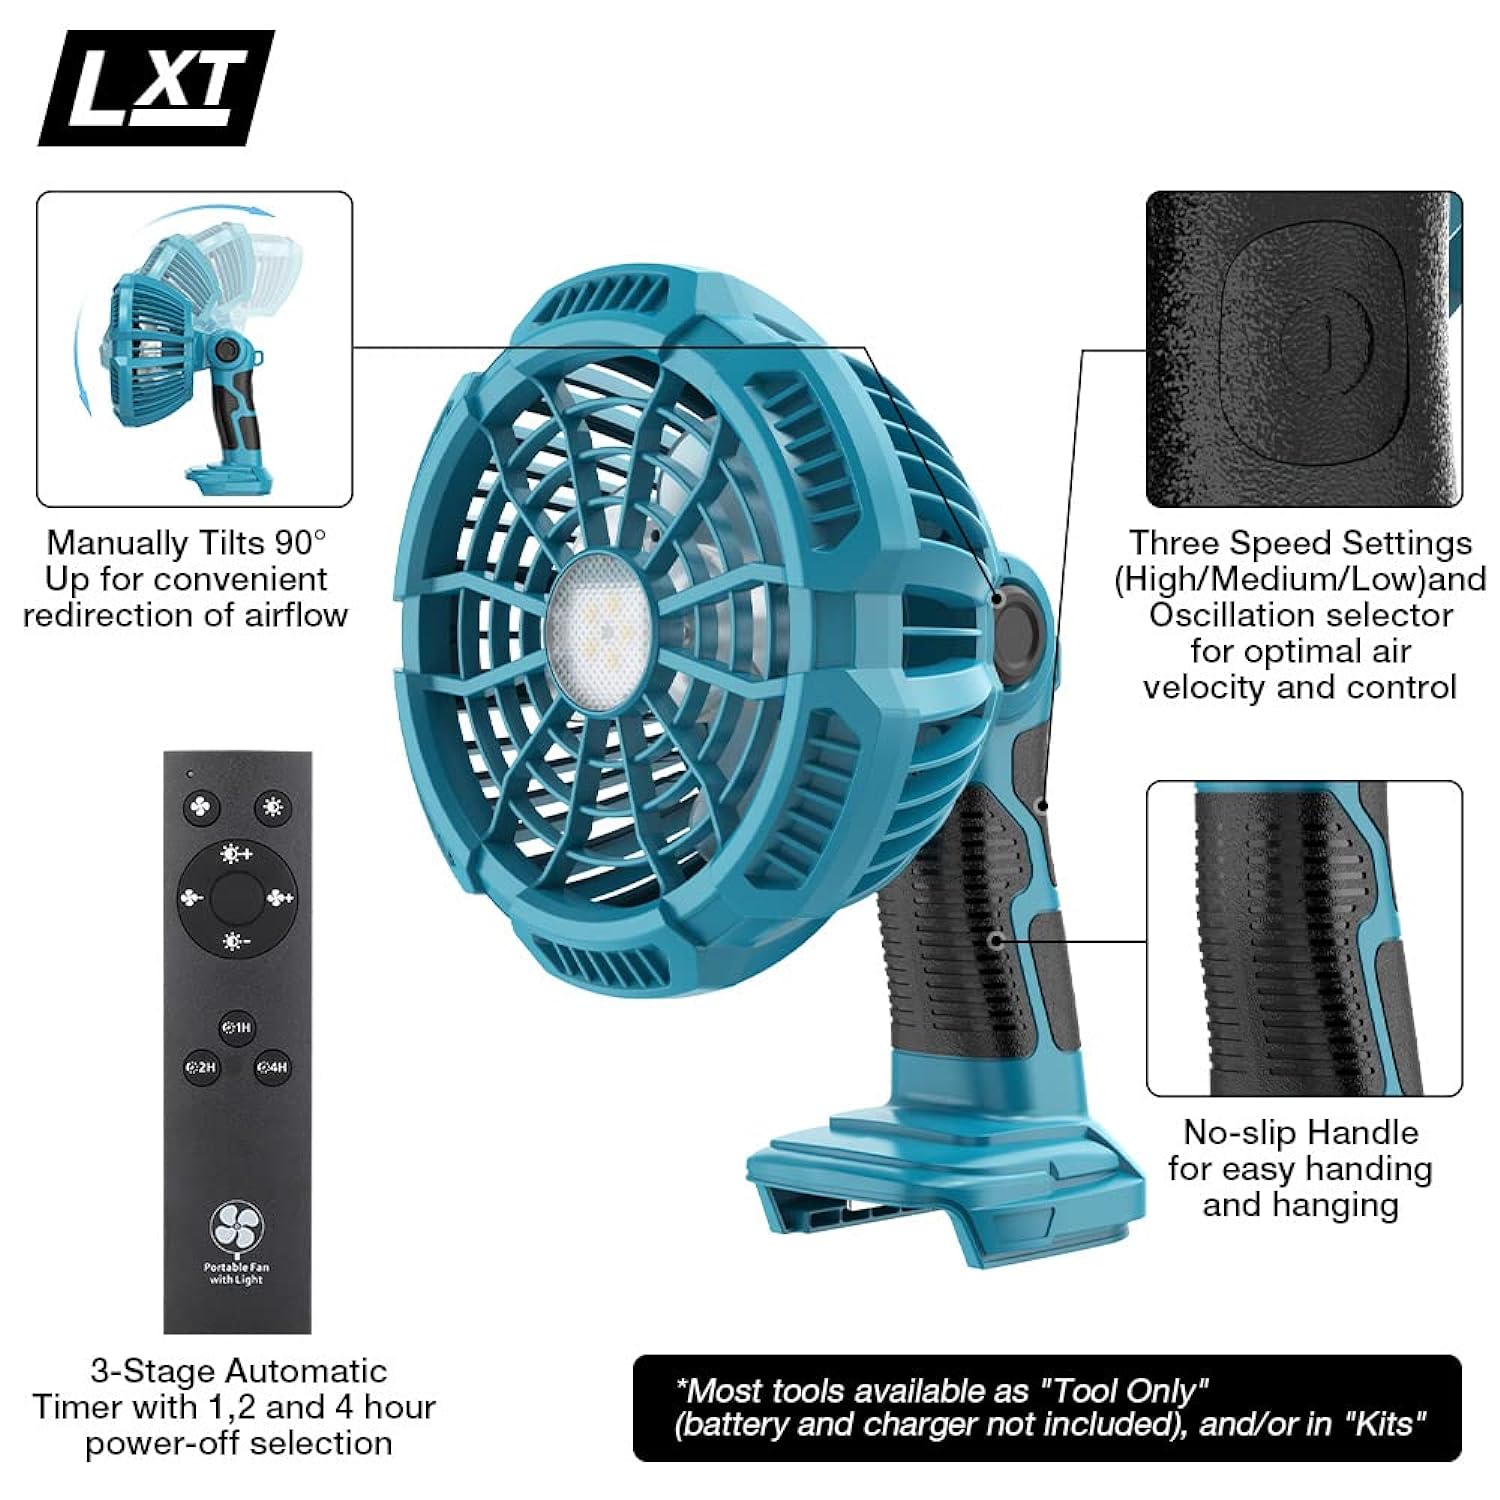 GCP Products Portable Fan Powered By Makita 18V Lxt Lithium-Ion Battery, Cordless Battery Operated Fan With 9W Led Work, Usb Port, Handhel…